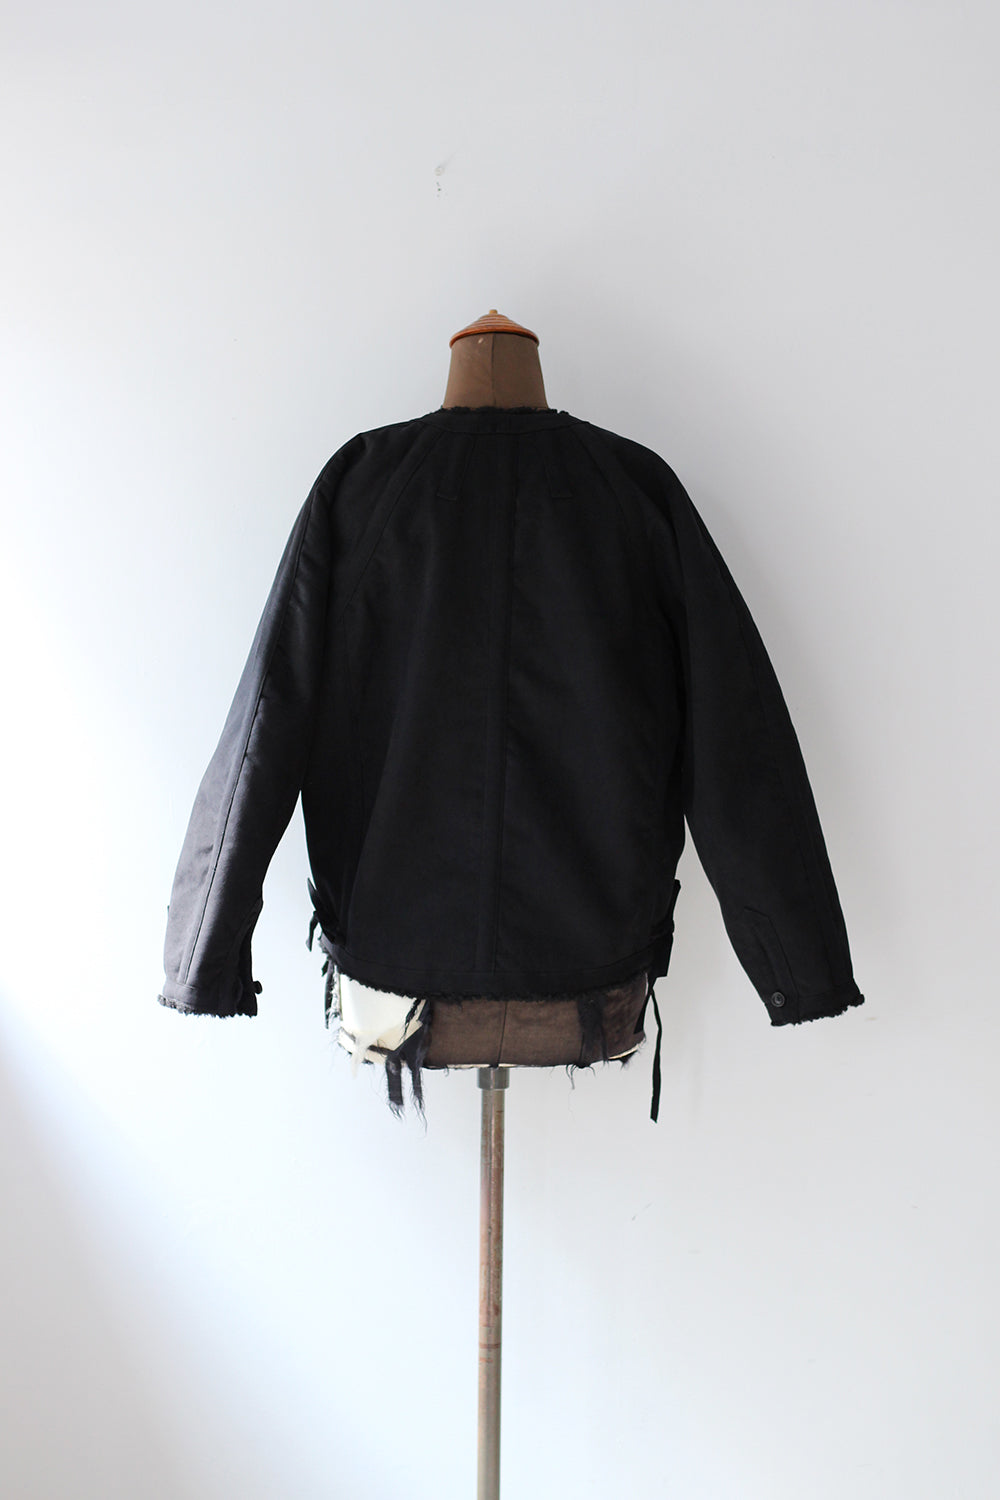 WRYHT "DOUBLE FACE TAPED LINER JACKET" (black)